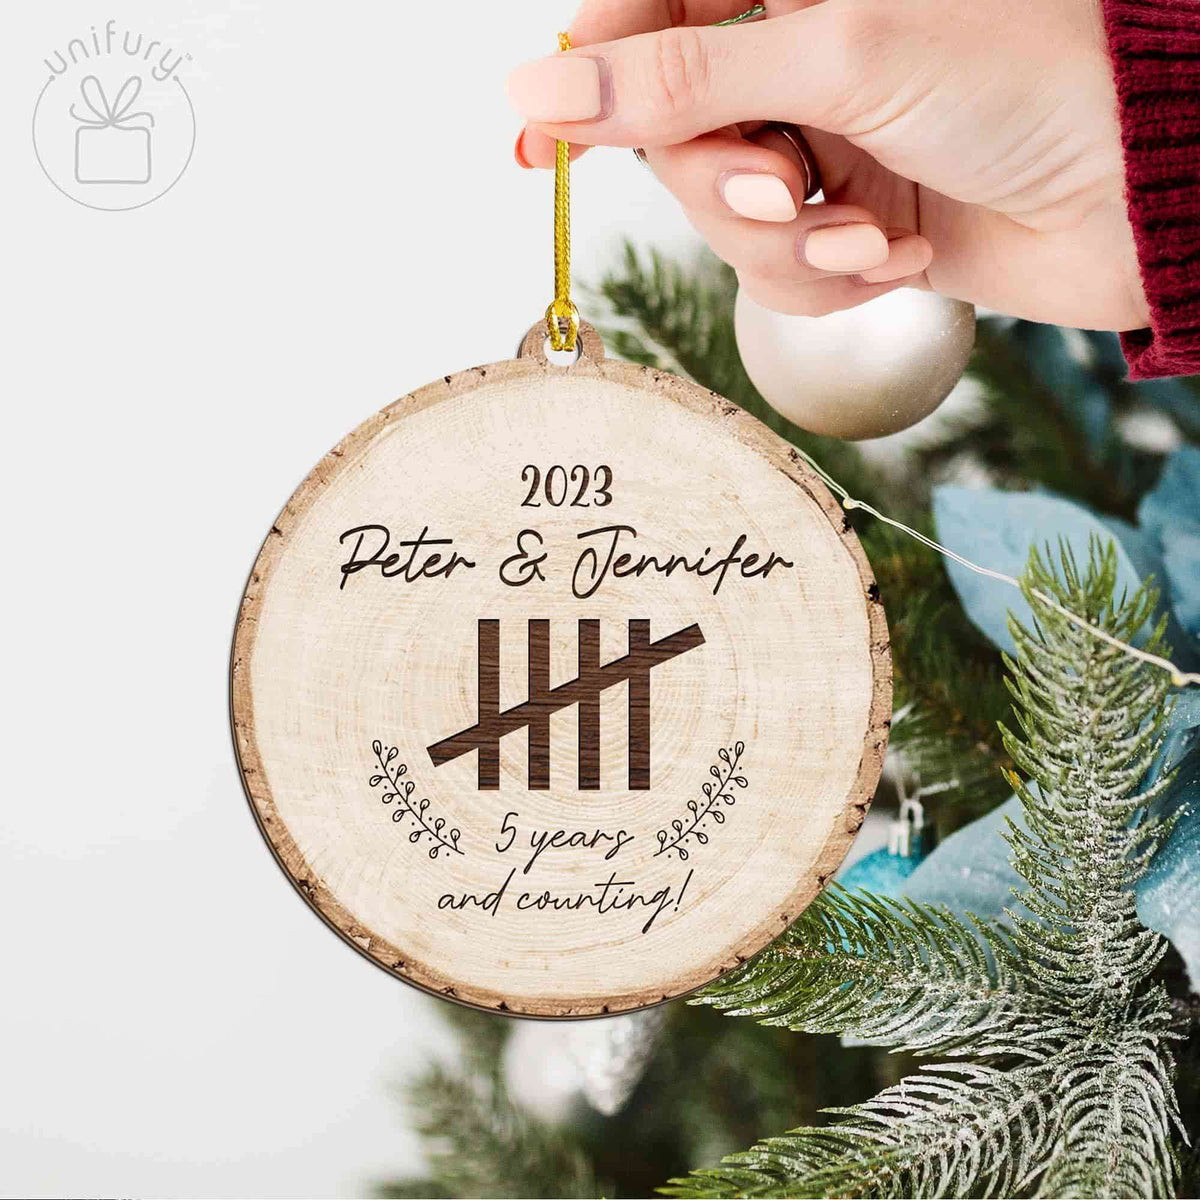 Personalized Wooden Wedding Aniversary Ornament